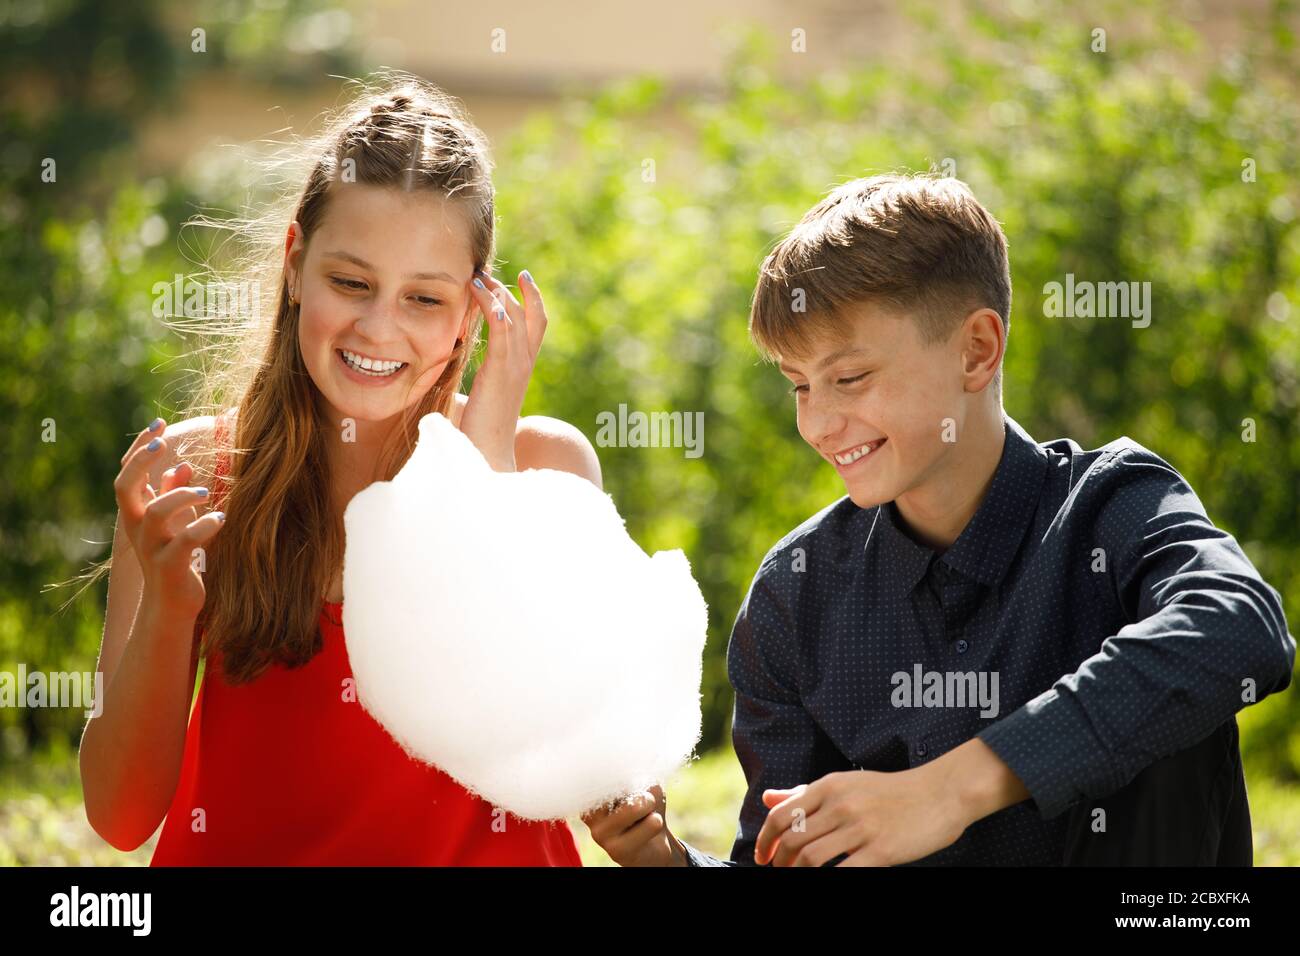 young couple on a romantic date eats cotton candy. Stock Photo